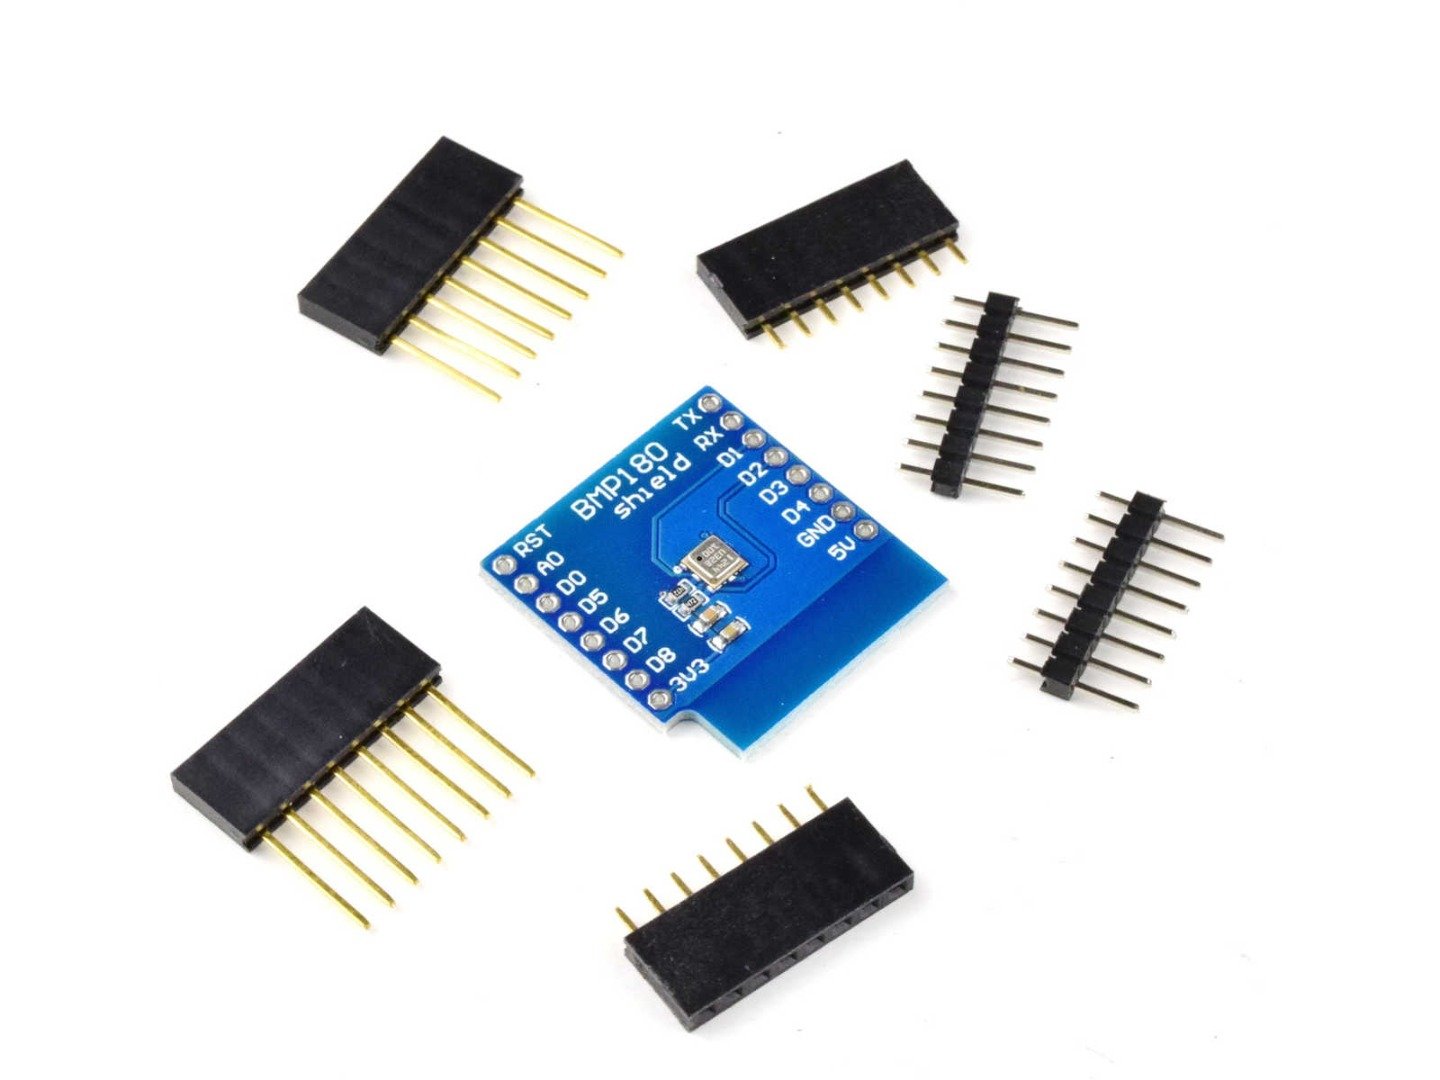 Barometric Sensor Module Digital Widely Used Pressure Professional with 6 Pin Header for D1 Mini